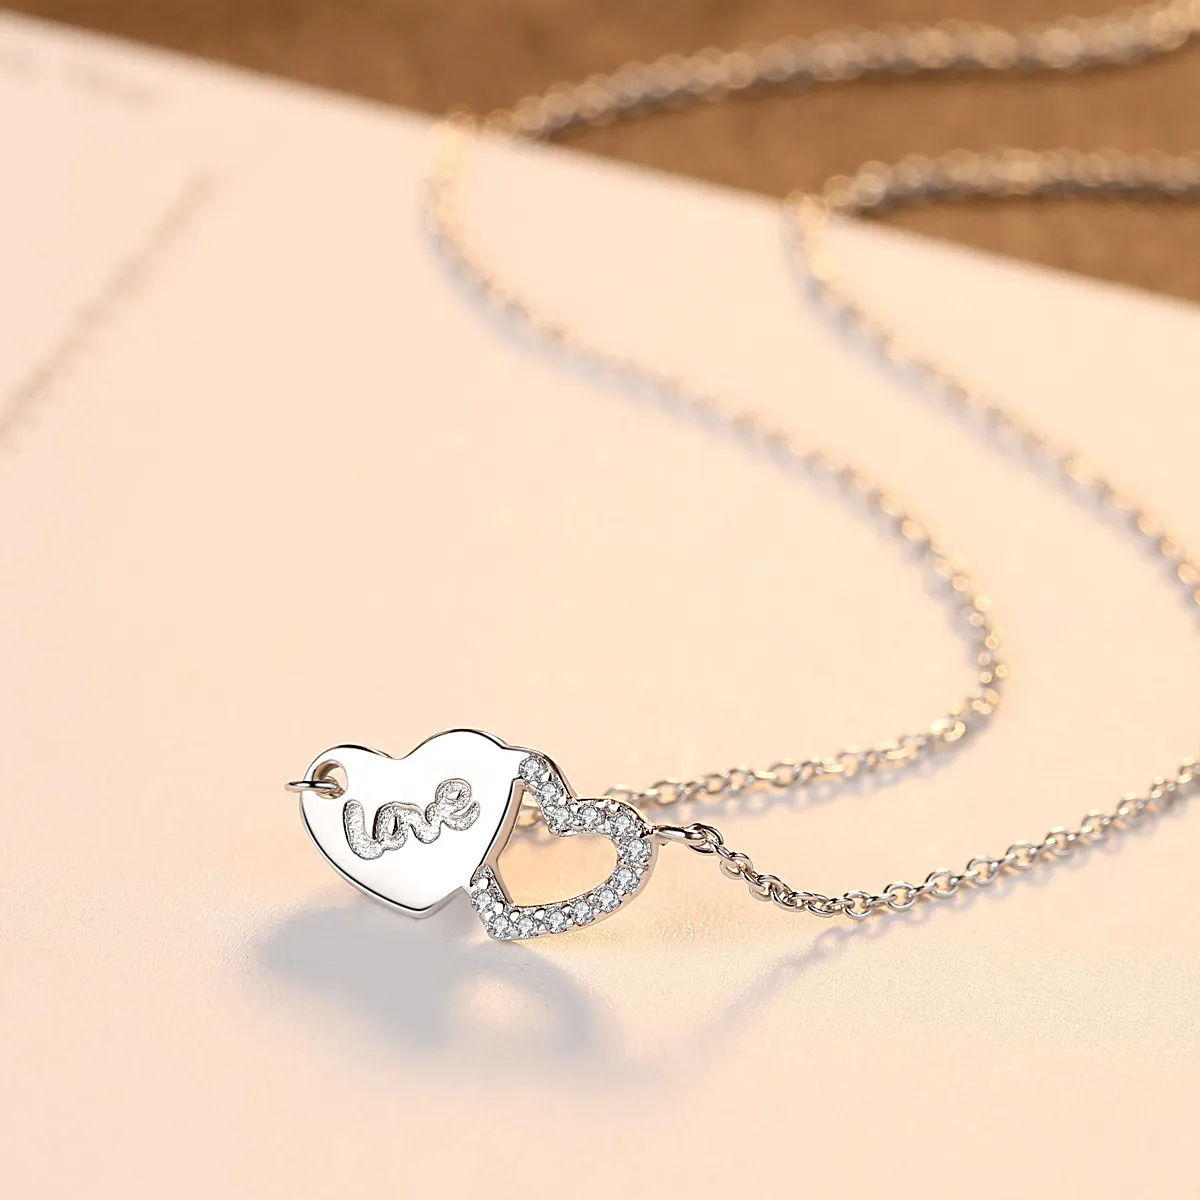 Korean Fashion Sweet Heart Love Letter Pendant Necklace Micro-set Zircon Romantic Women Clavicle Chain Necklace Jewelry Valentine's Day Gift